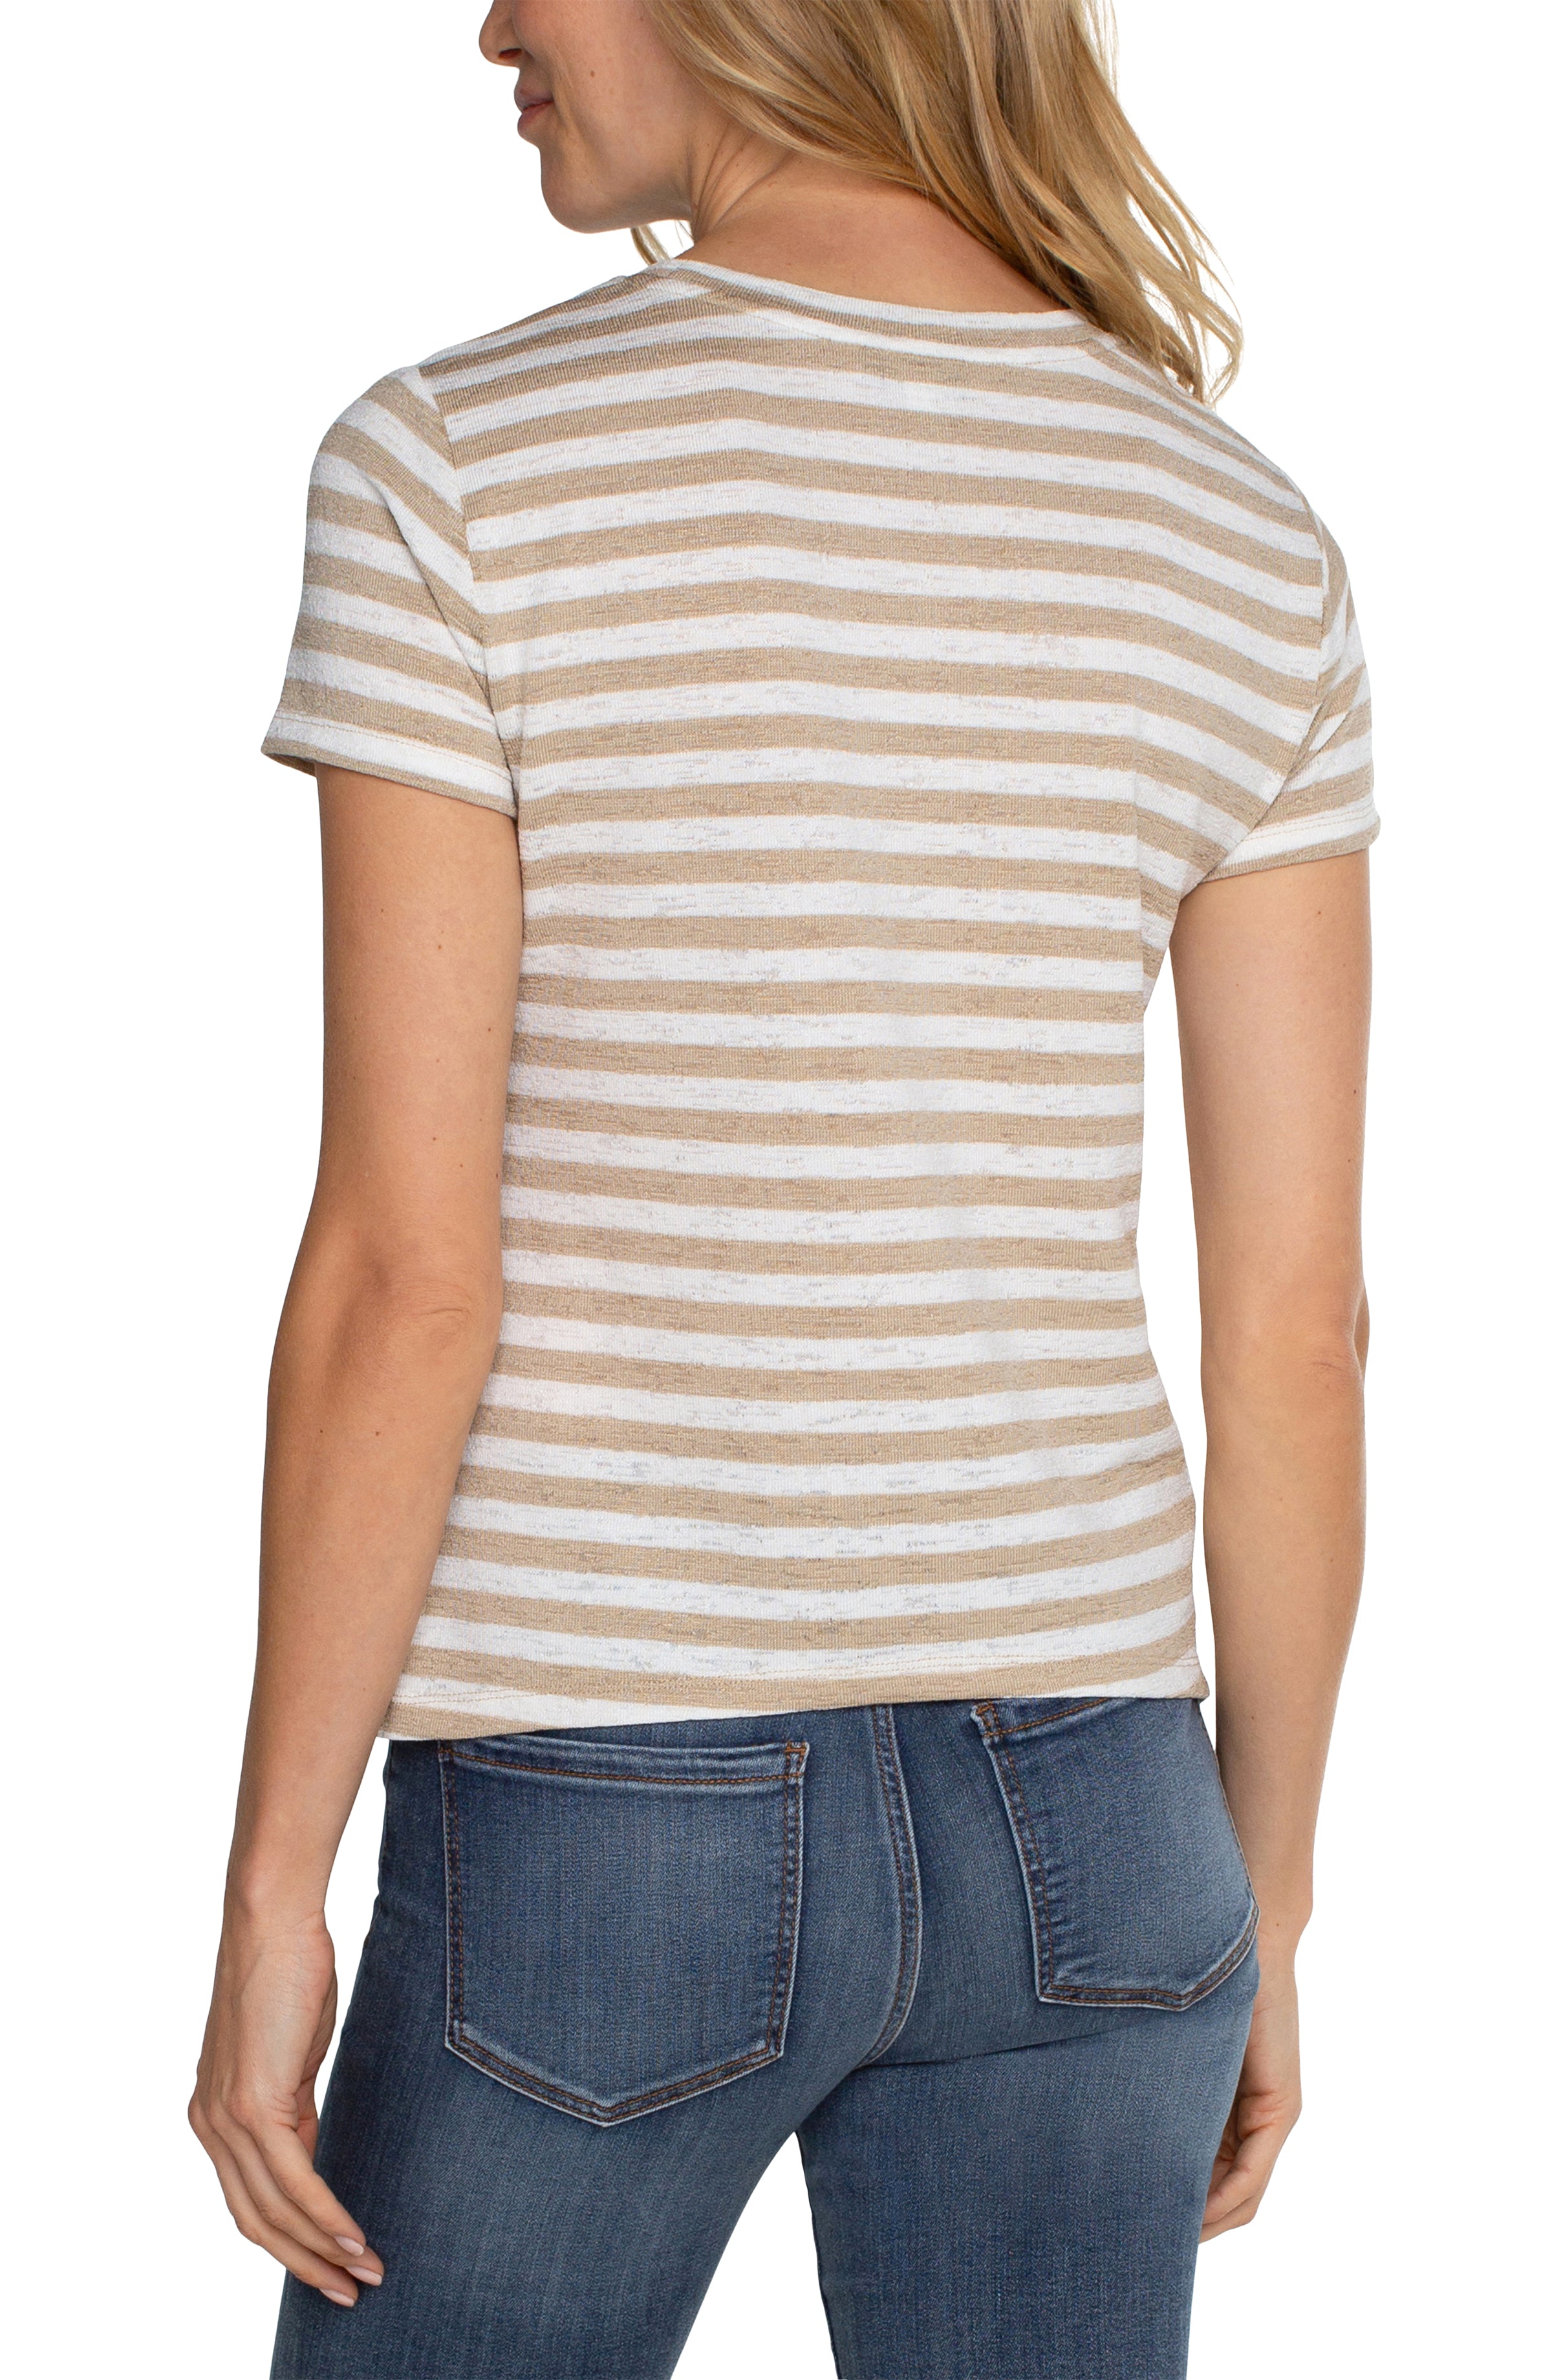 LVP Short Sleeve Kit Top - Cream with Tan Stripe Back View